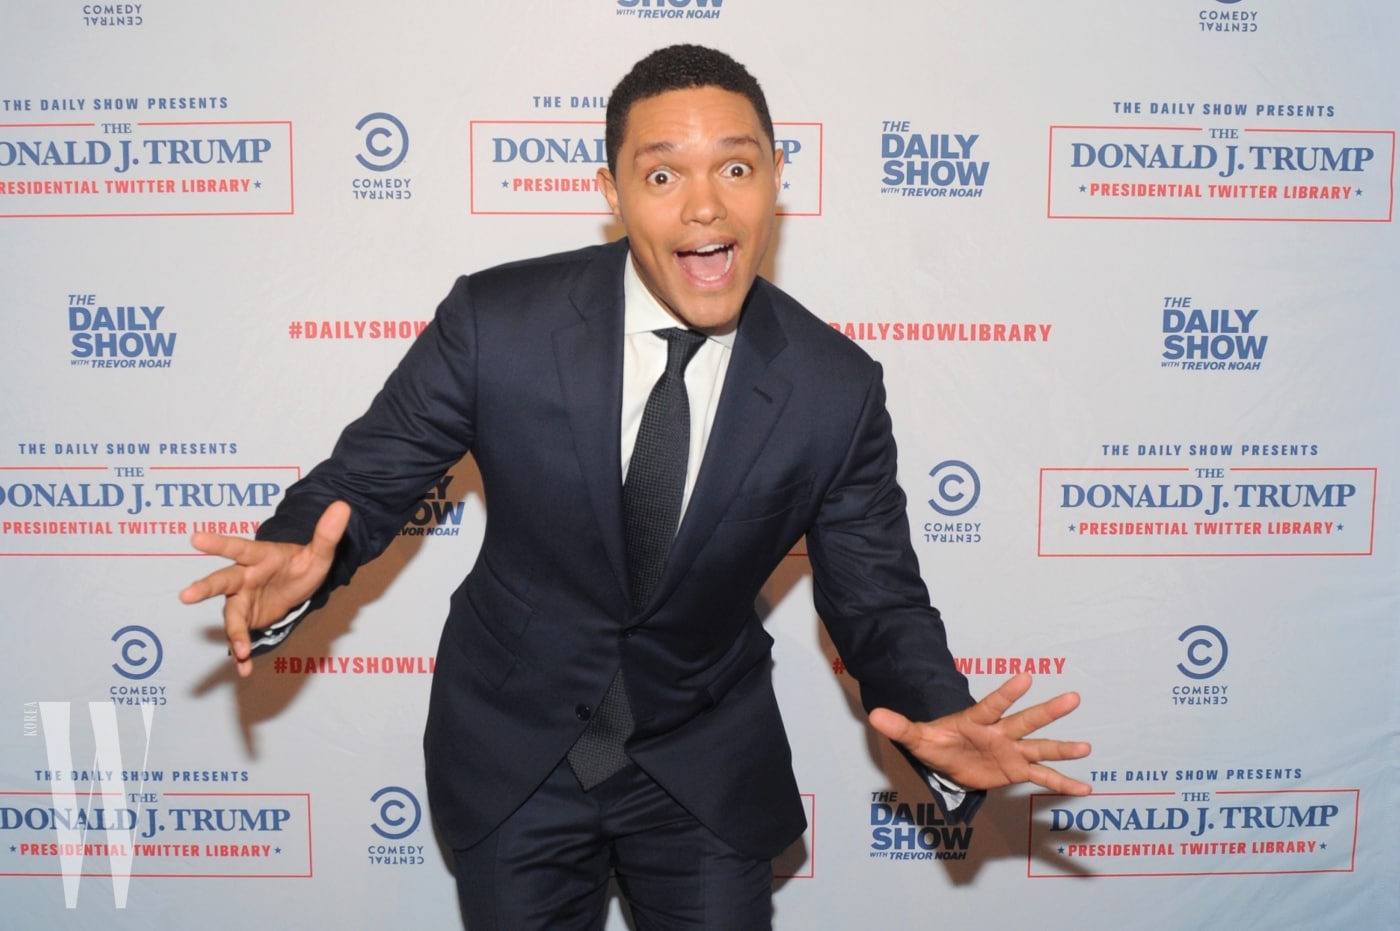 Comedy Central's The Daily Show Presents: The Donald J. Trump Presidential Twitter Library Opening Reception